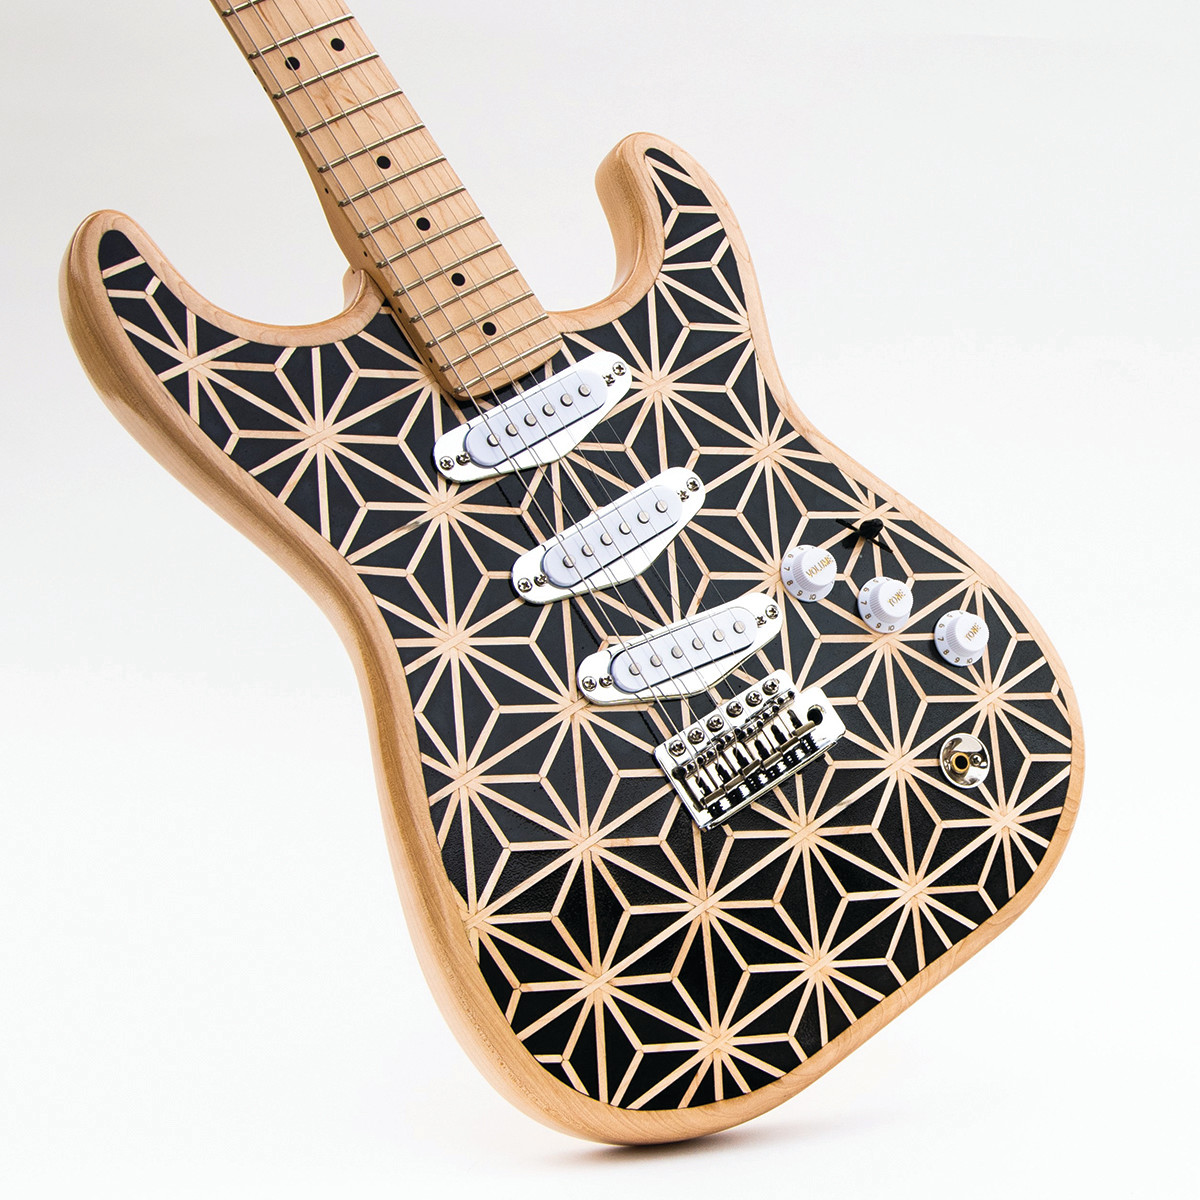 The winning Kumiko-style electric guitar by Miles Menely